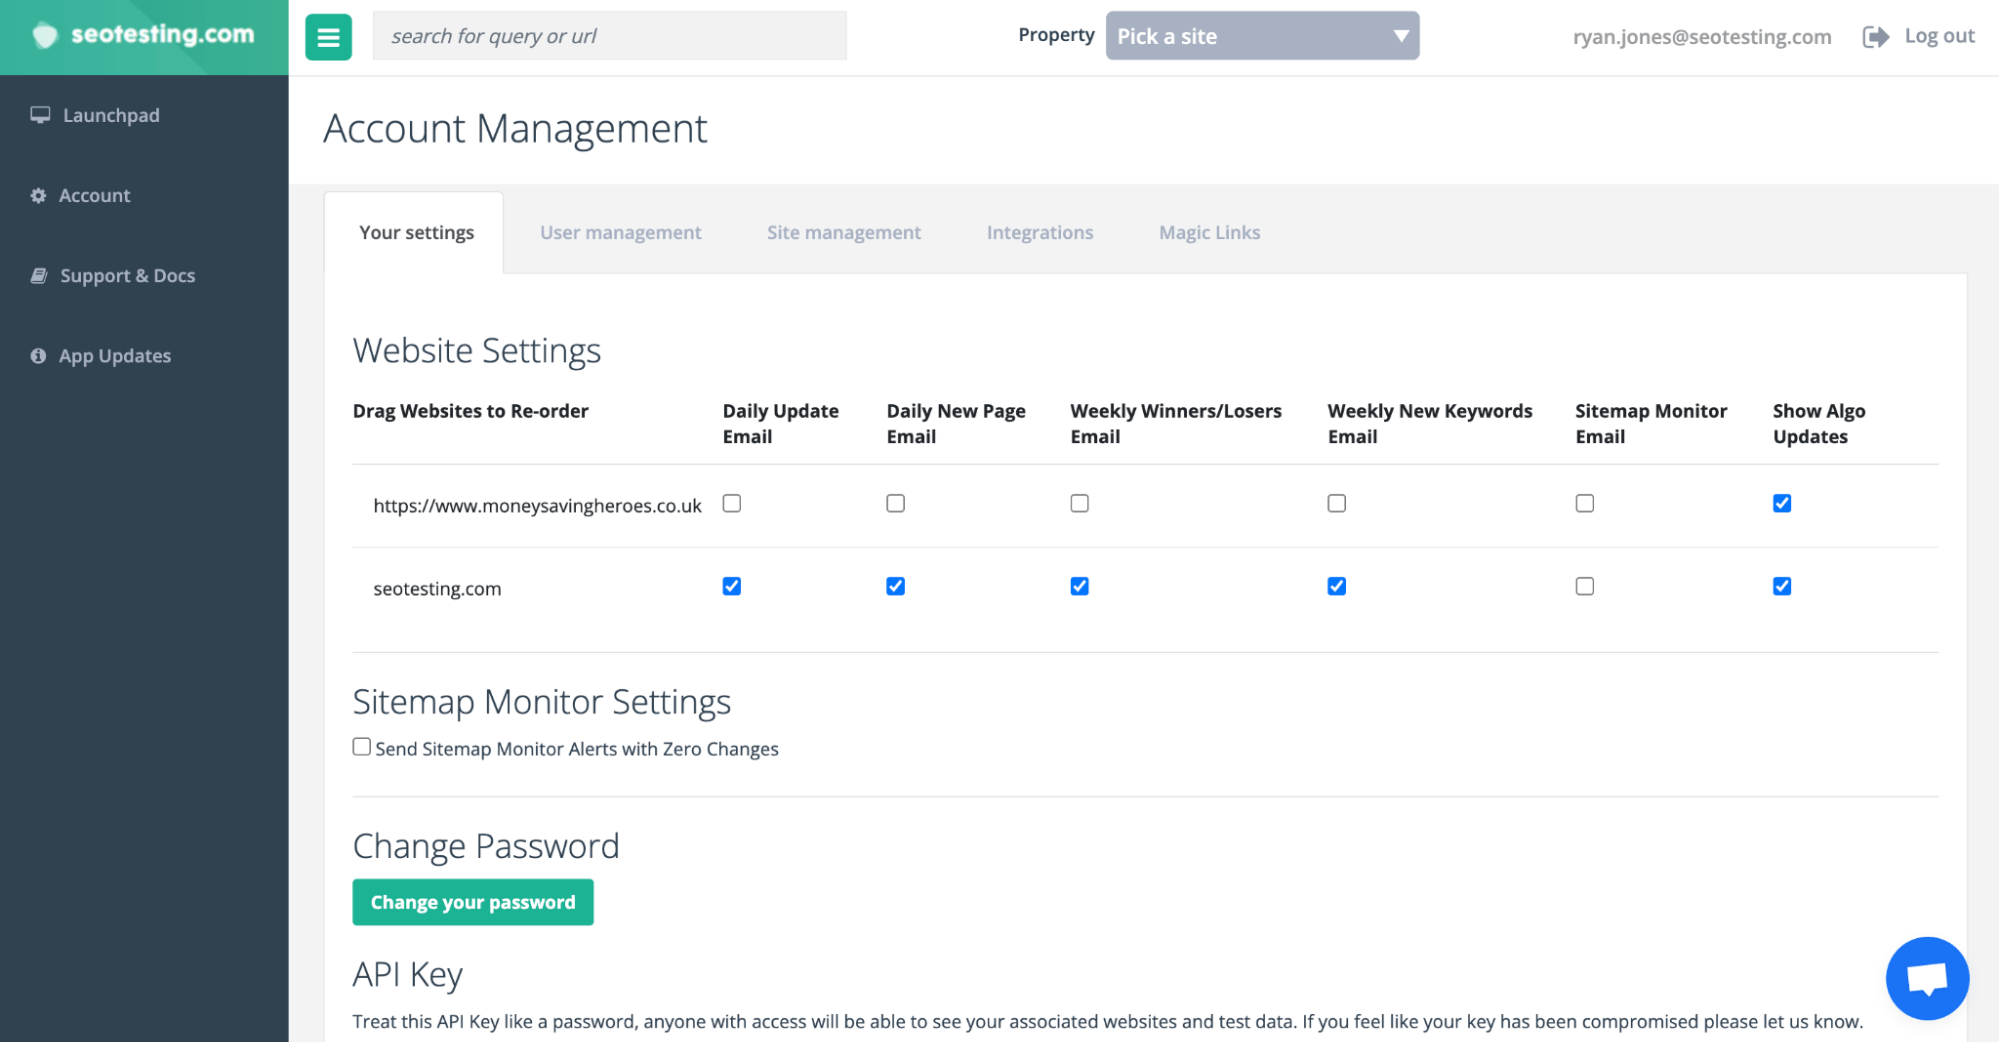 SEO Testing account management page showing website and email settings for different alerts and updates. 